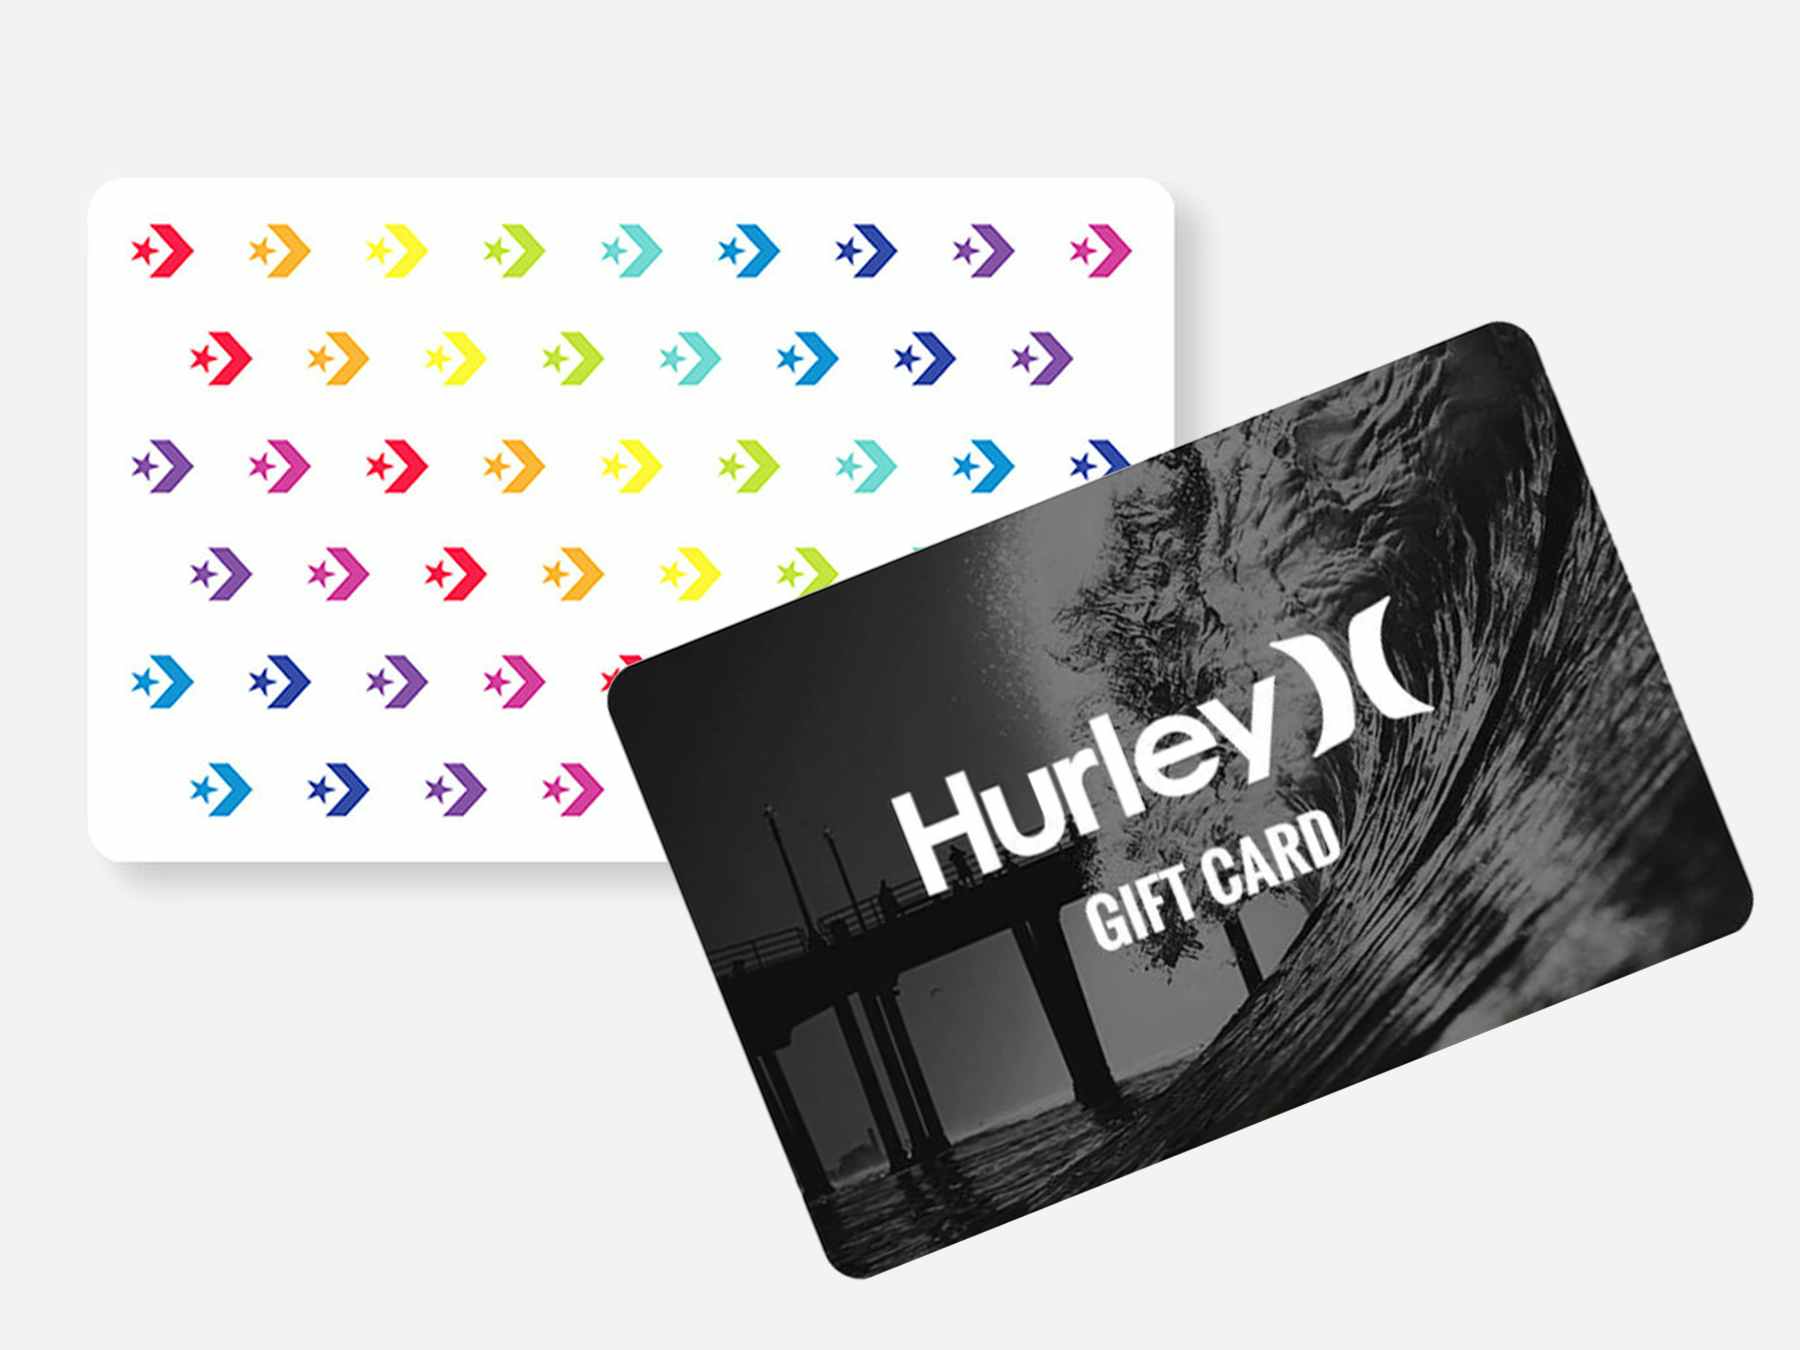 A graphic of Converse and Hurley gift cards.